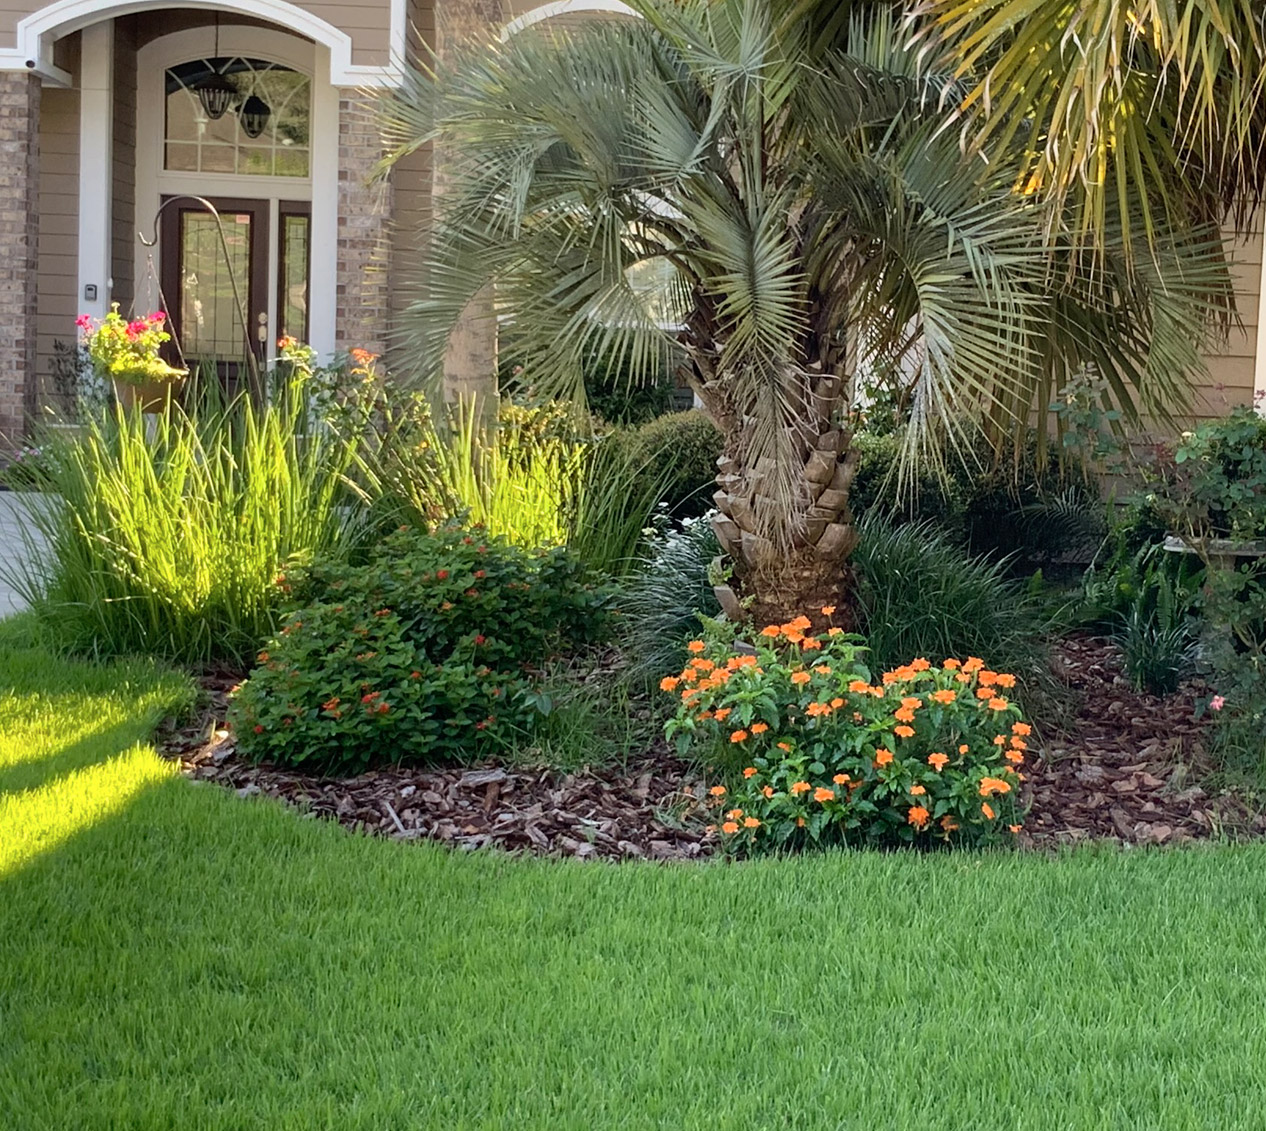 An example of a Florida Friendly Landscape - palm trees, plants, flowers and grass.